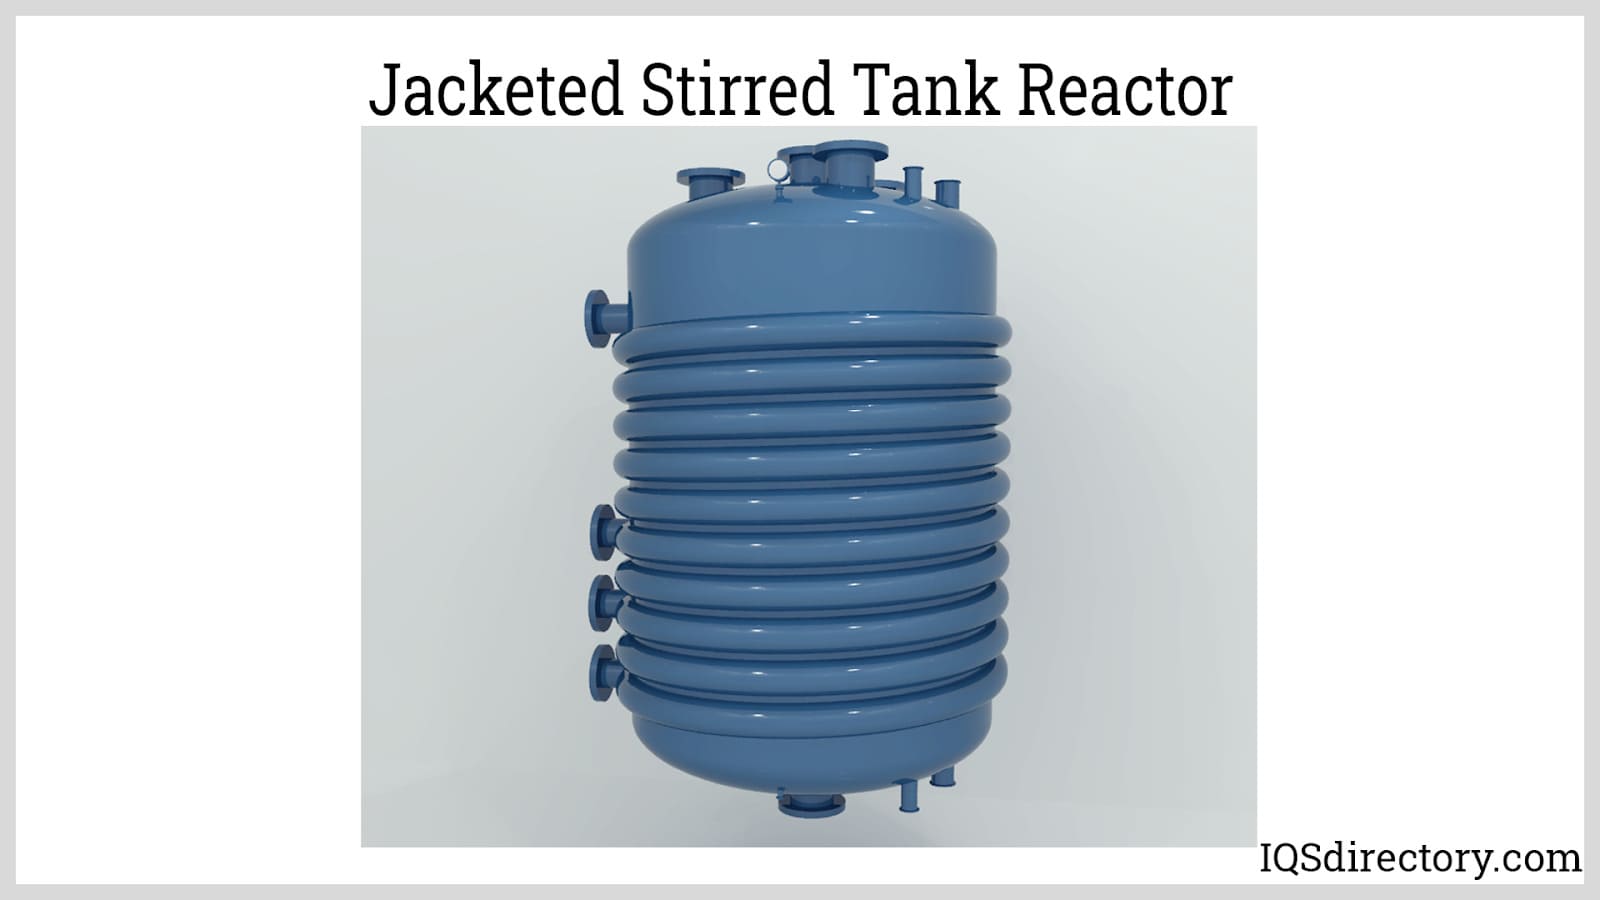 Jacketed Stirred Tank Reactor